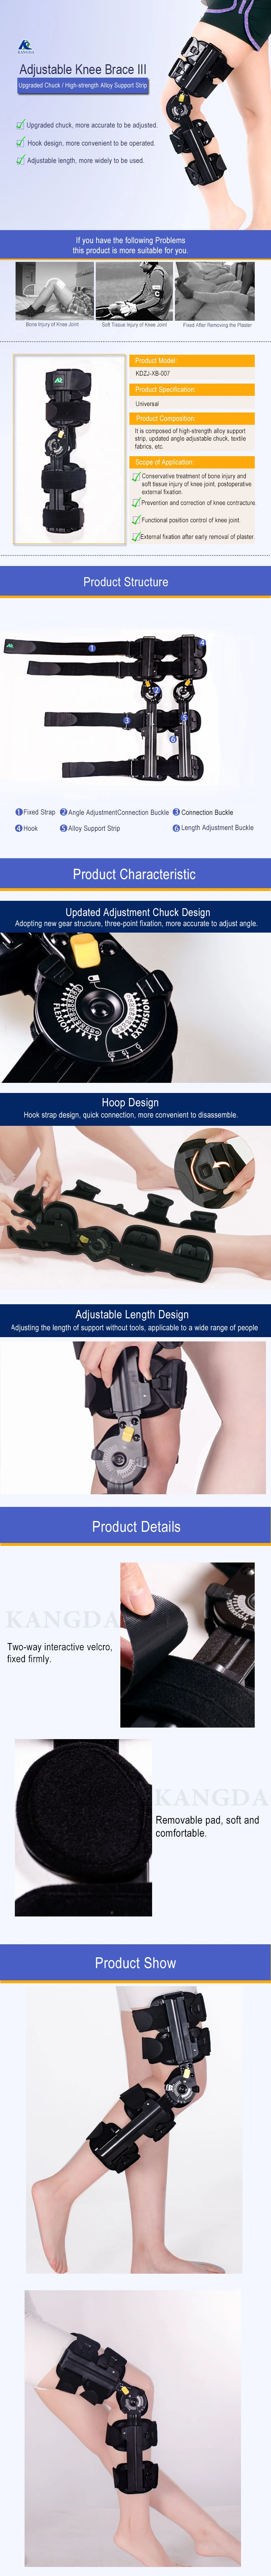 Hinged Knee Brace for Pain Relief Adjustable Sport Firm Stabilizing Knee Support